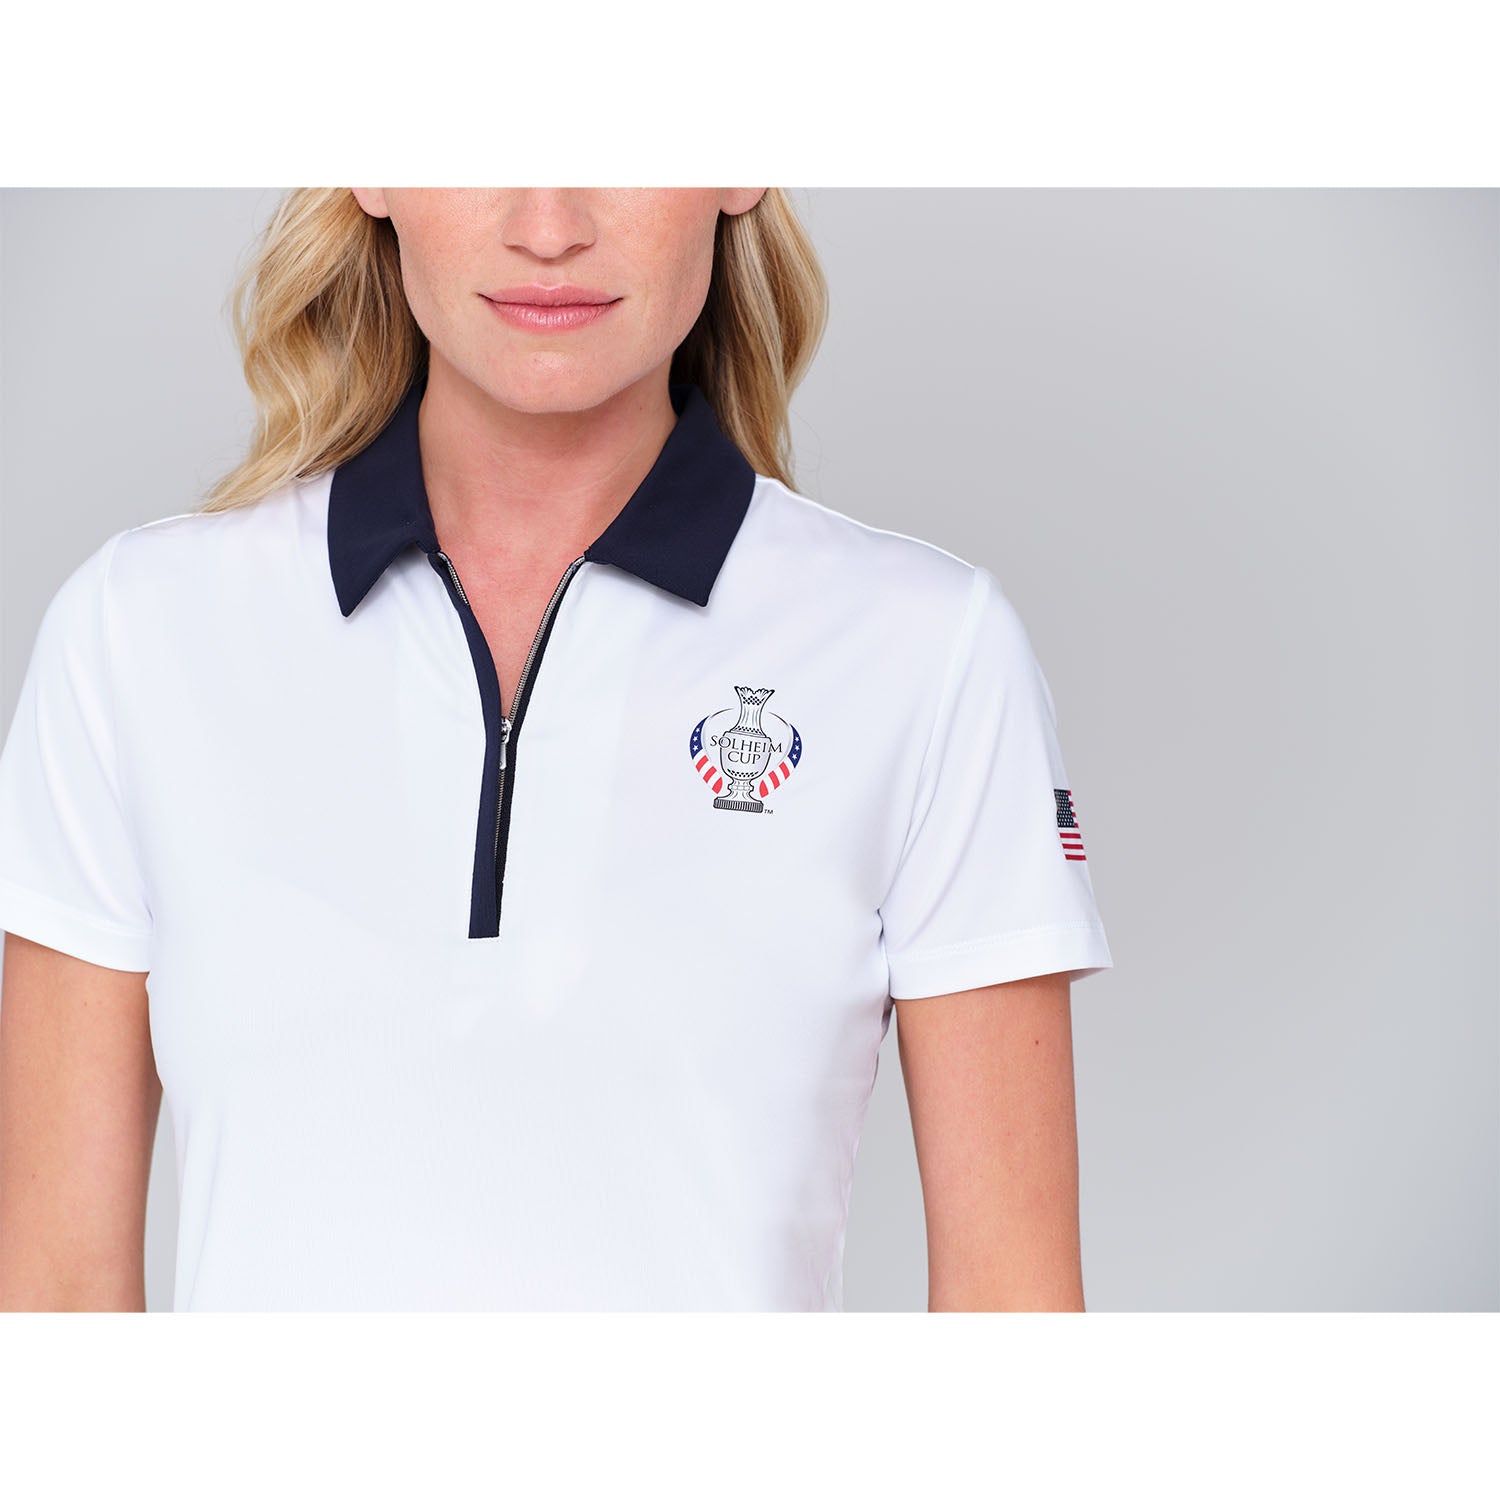 Dunning 2023 LPGA Official Solheim Cup Team Uniform Women's Short Sleeve Performance Polo in White - Lifestyle Zoomed in Front View